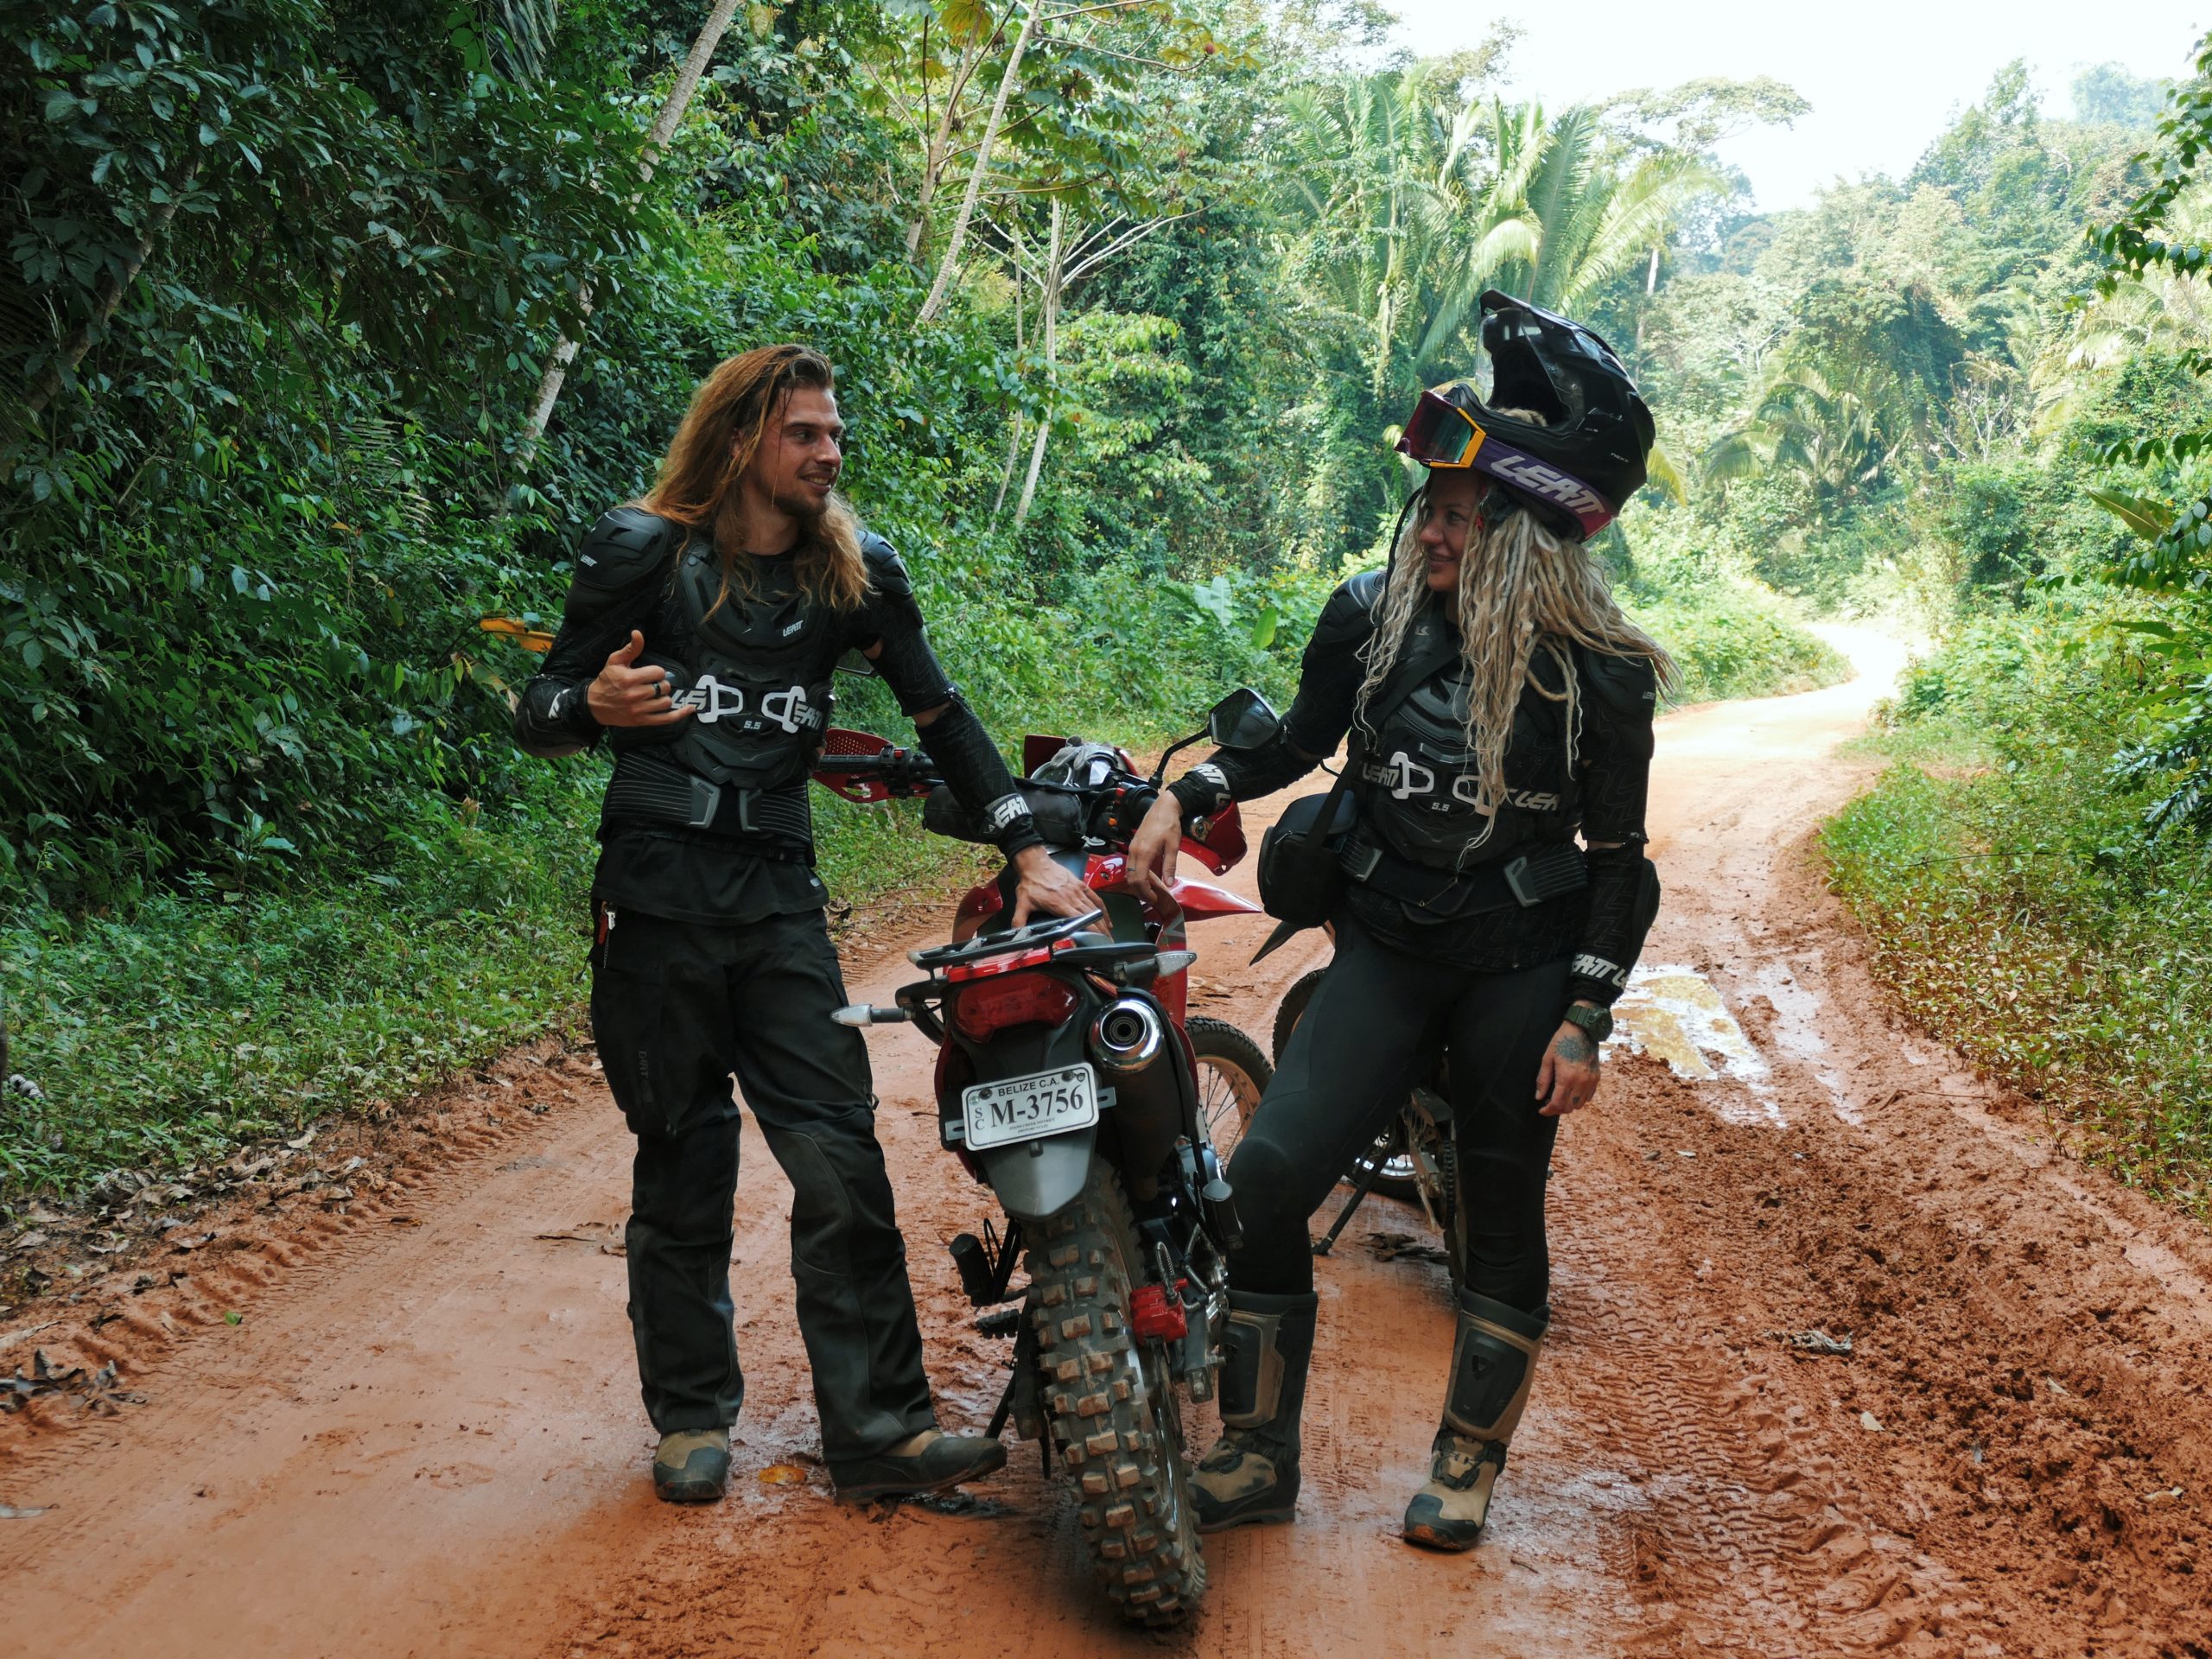 Belize Motorcycle Adventures: Riding the Caribbean // Adventure Bound